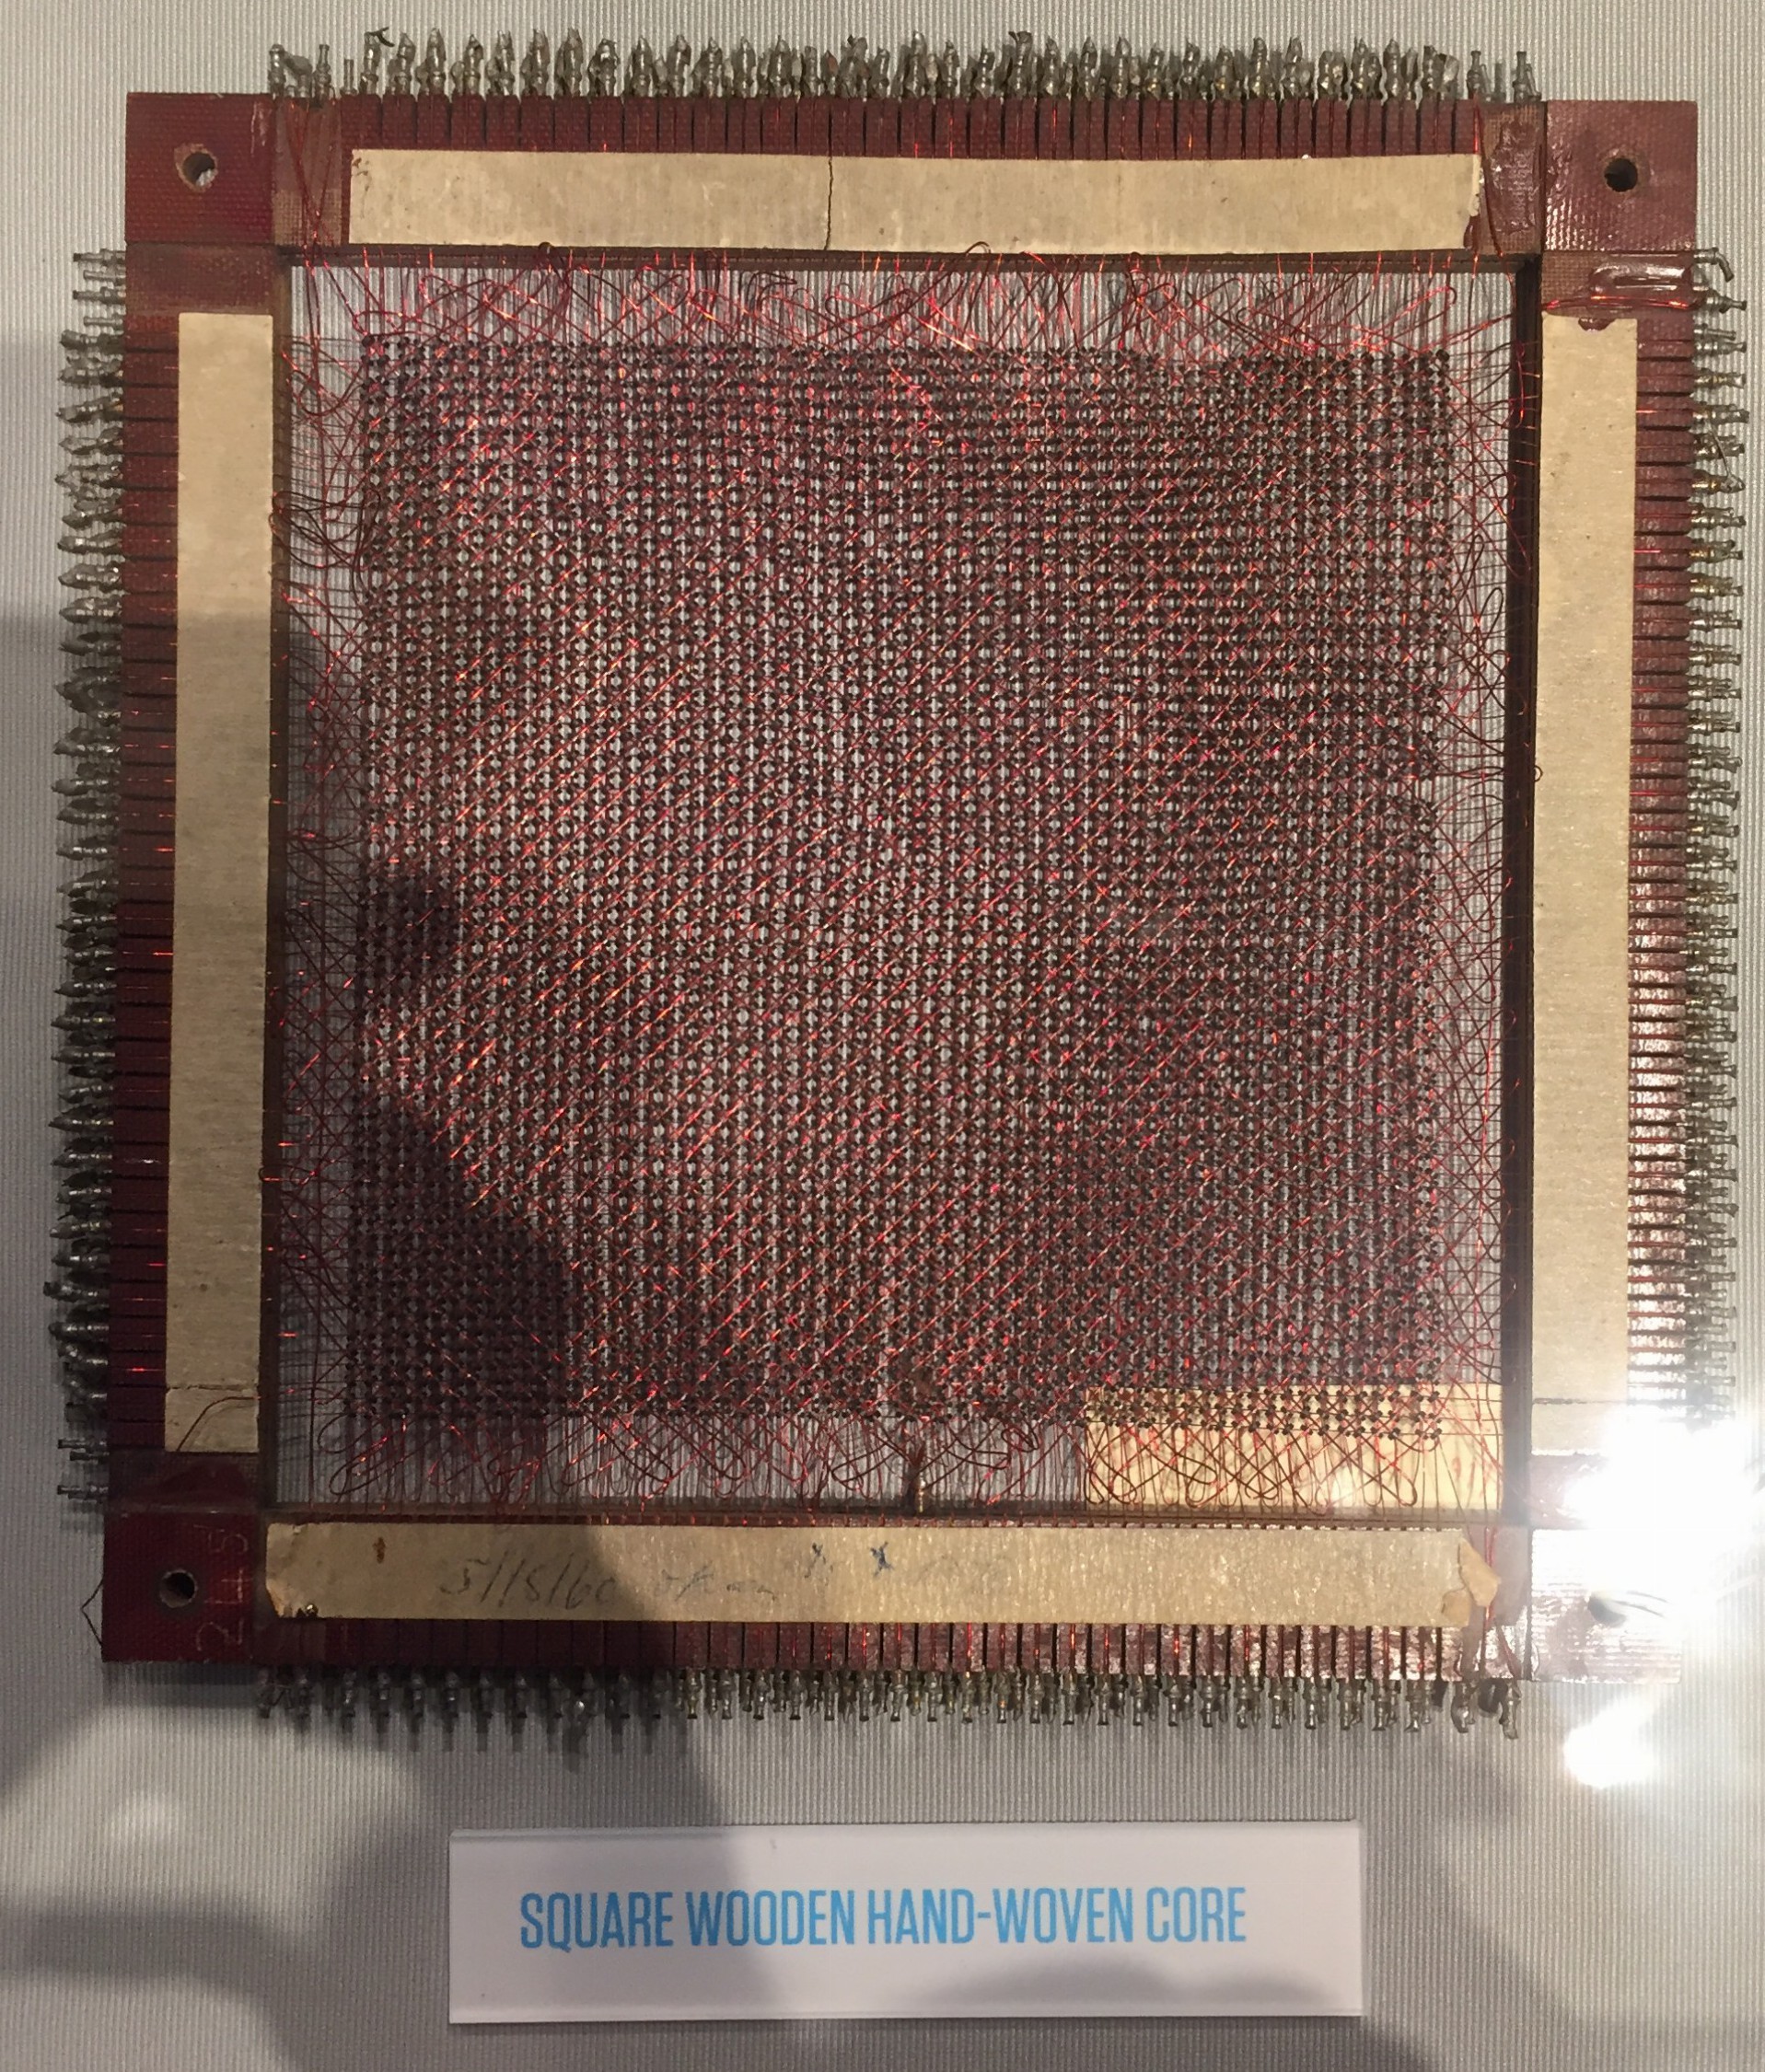 Hand-woven memory core from the Living Computer Museum, Seattle, WA